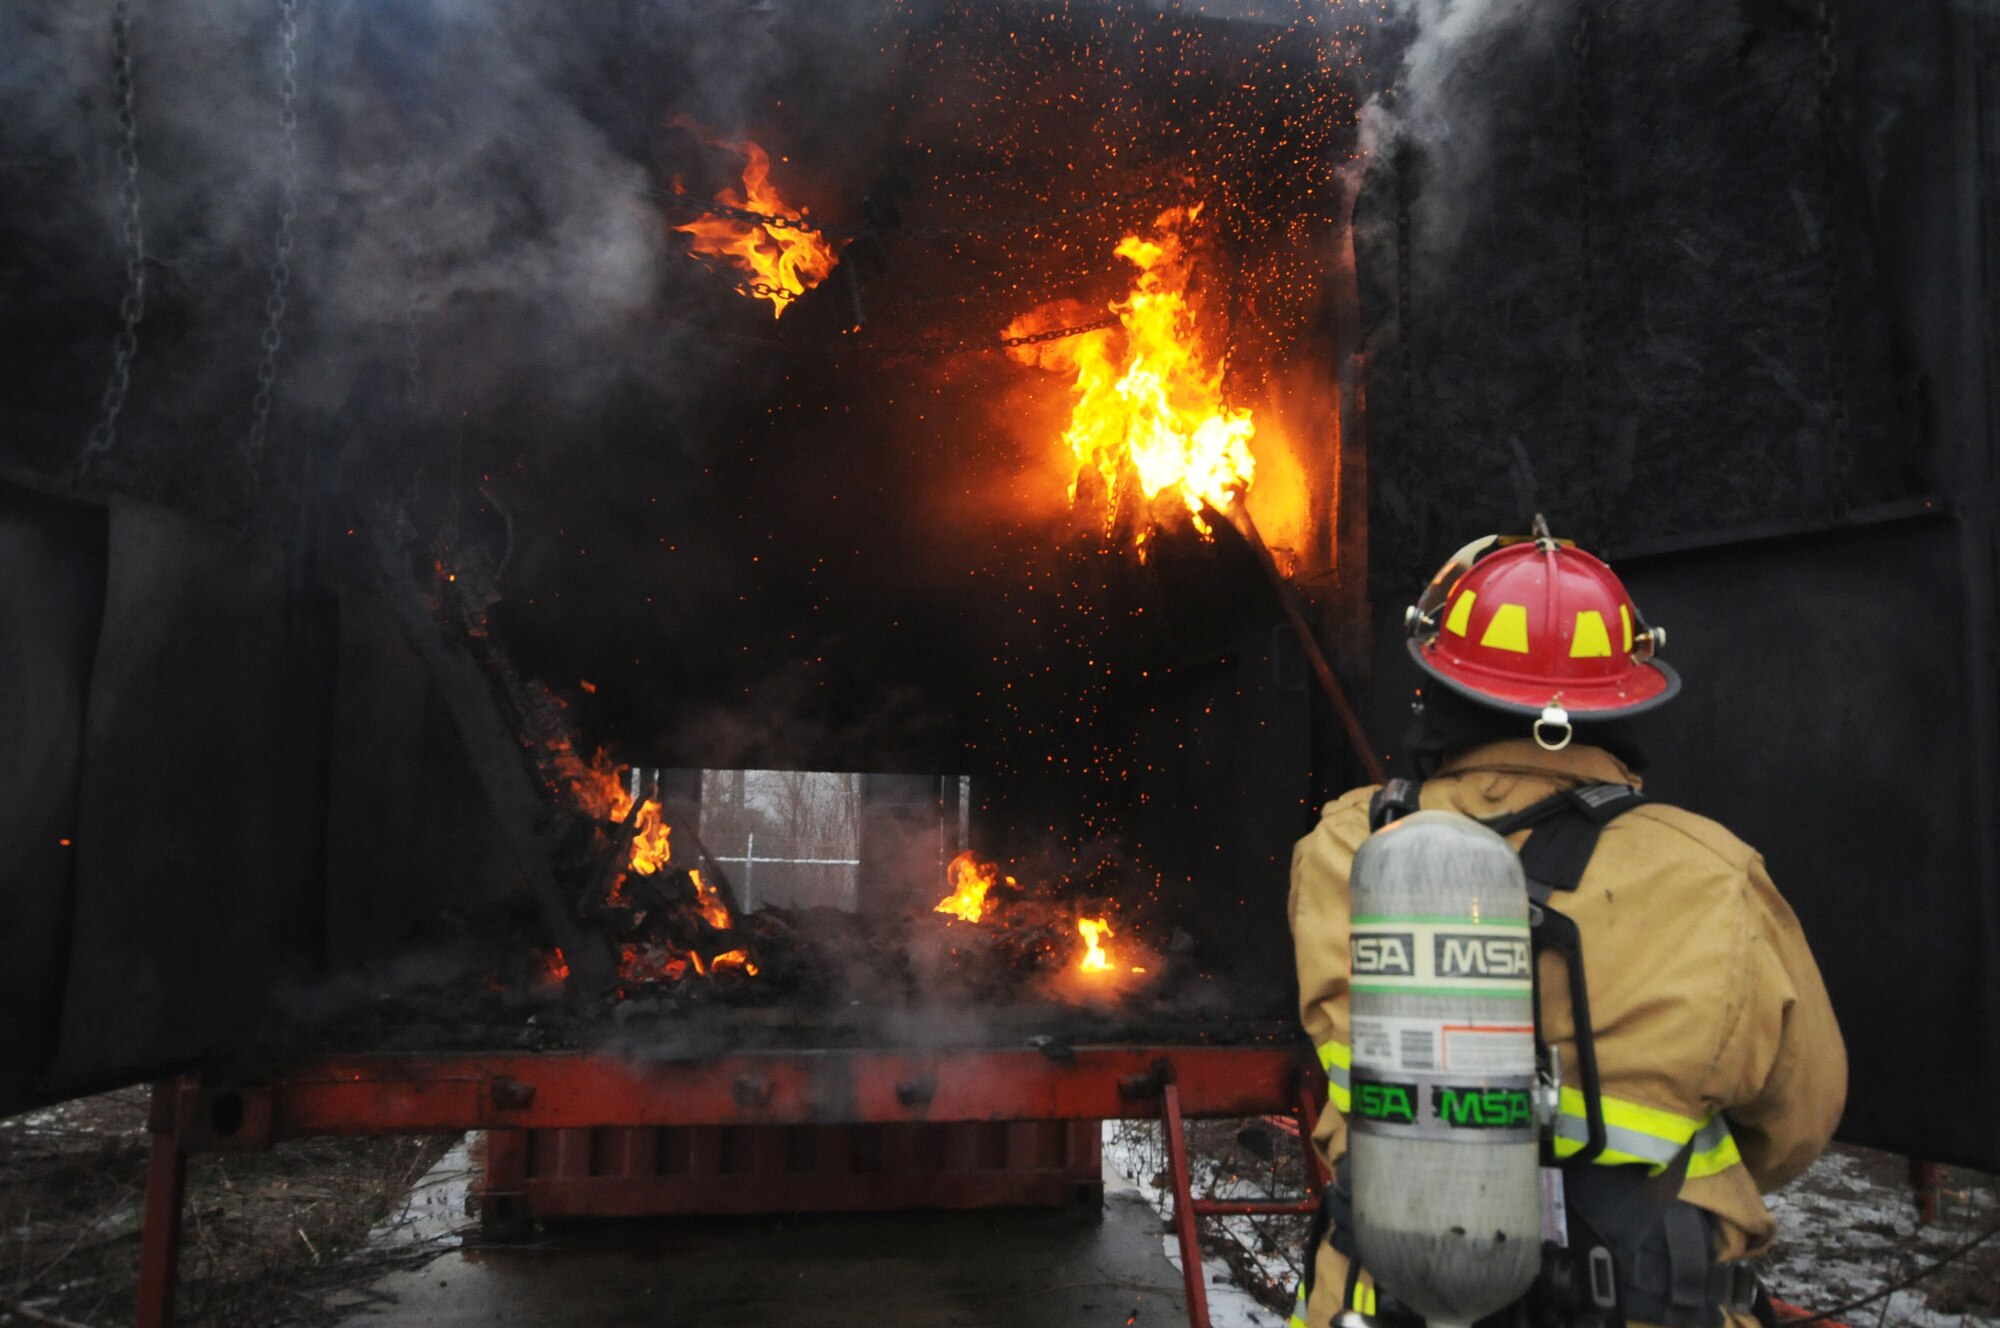 110th Attack Wing, Civil Engineering Squadron, Firefighters conduct Flashover training Saturday, January, 9, 2016, Thornapple Township Fire Station, Middleville, Mich.  In total fifteen firefighters participated in the flashover training, flashovers normally occur at 930 to 1100 degrees Fahrenheit, gases form at the ceiling of a structure, and suddenly ignite causing the entire ceiling to be on fire.  The 110th Fire Department is working closely with our local communities to increase hands on training and enrich our local partnerships.  (U.S. Air Force photo by Tech. Sgt. Timothy Diephouse/released)